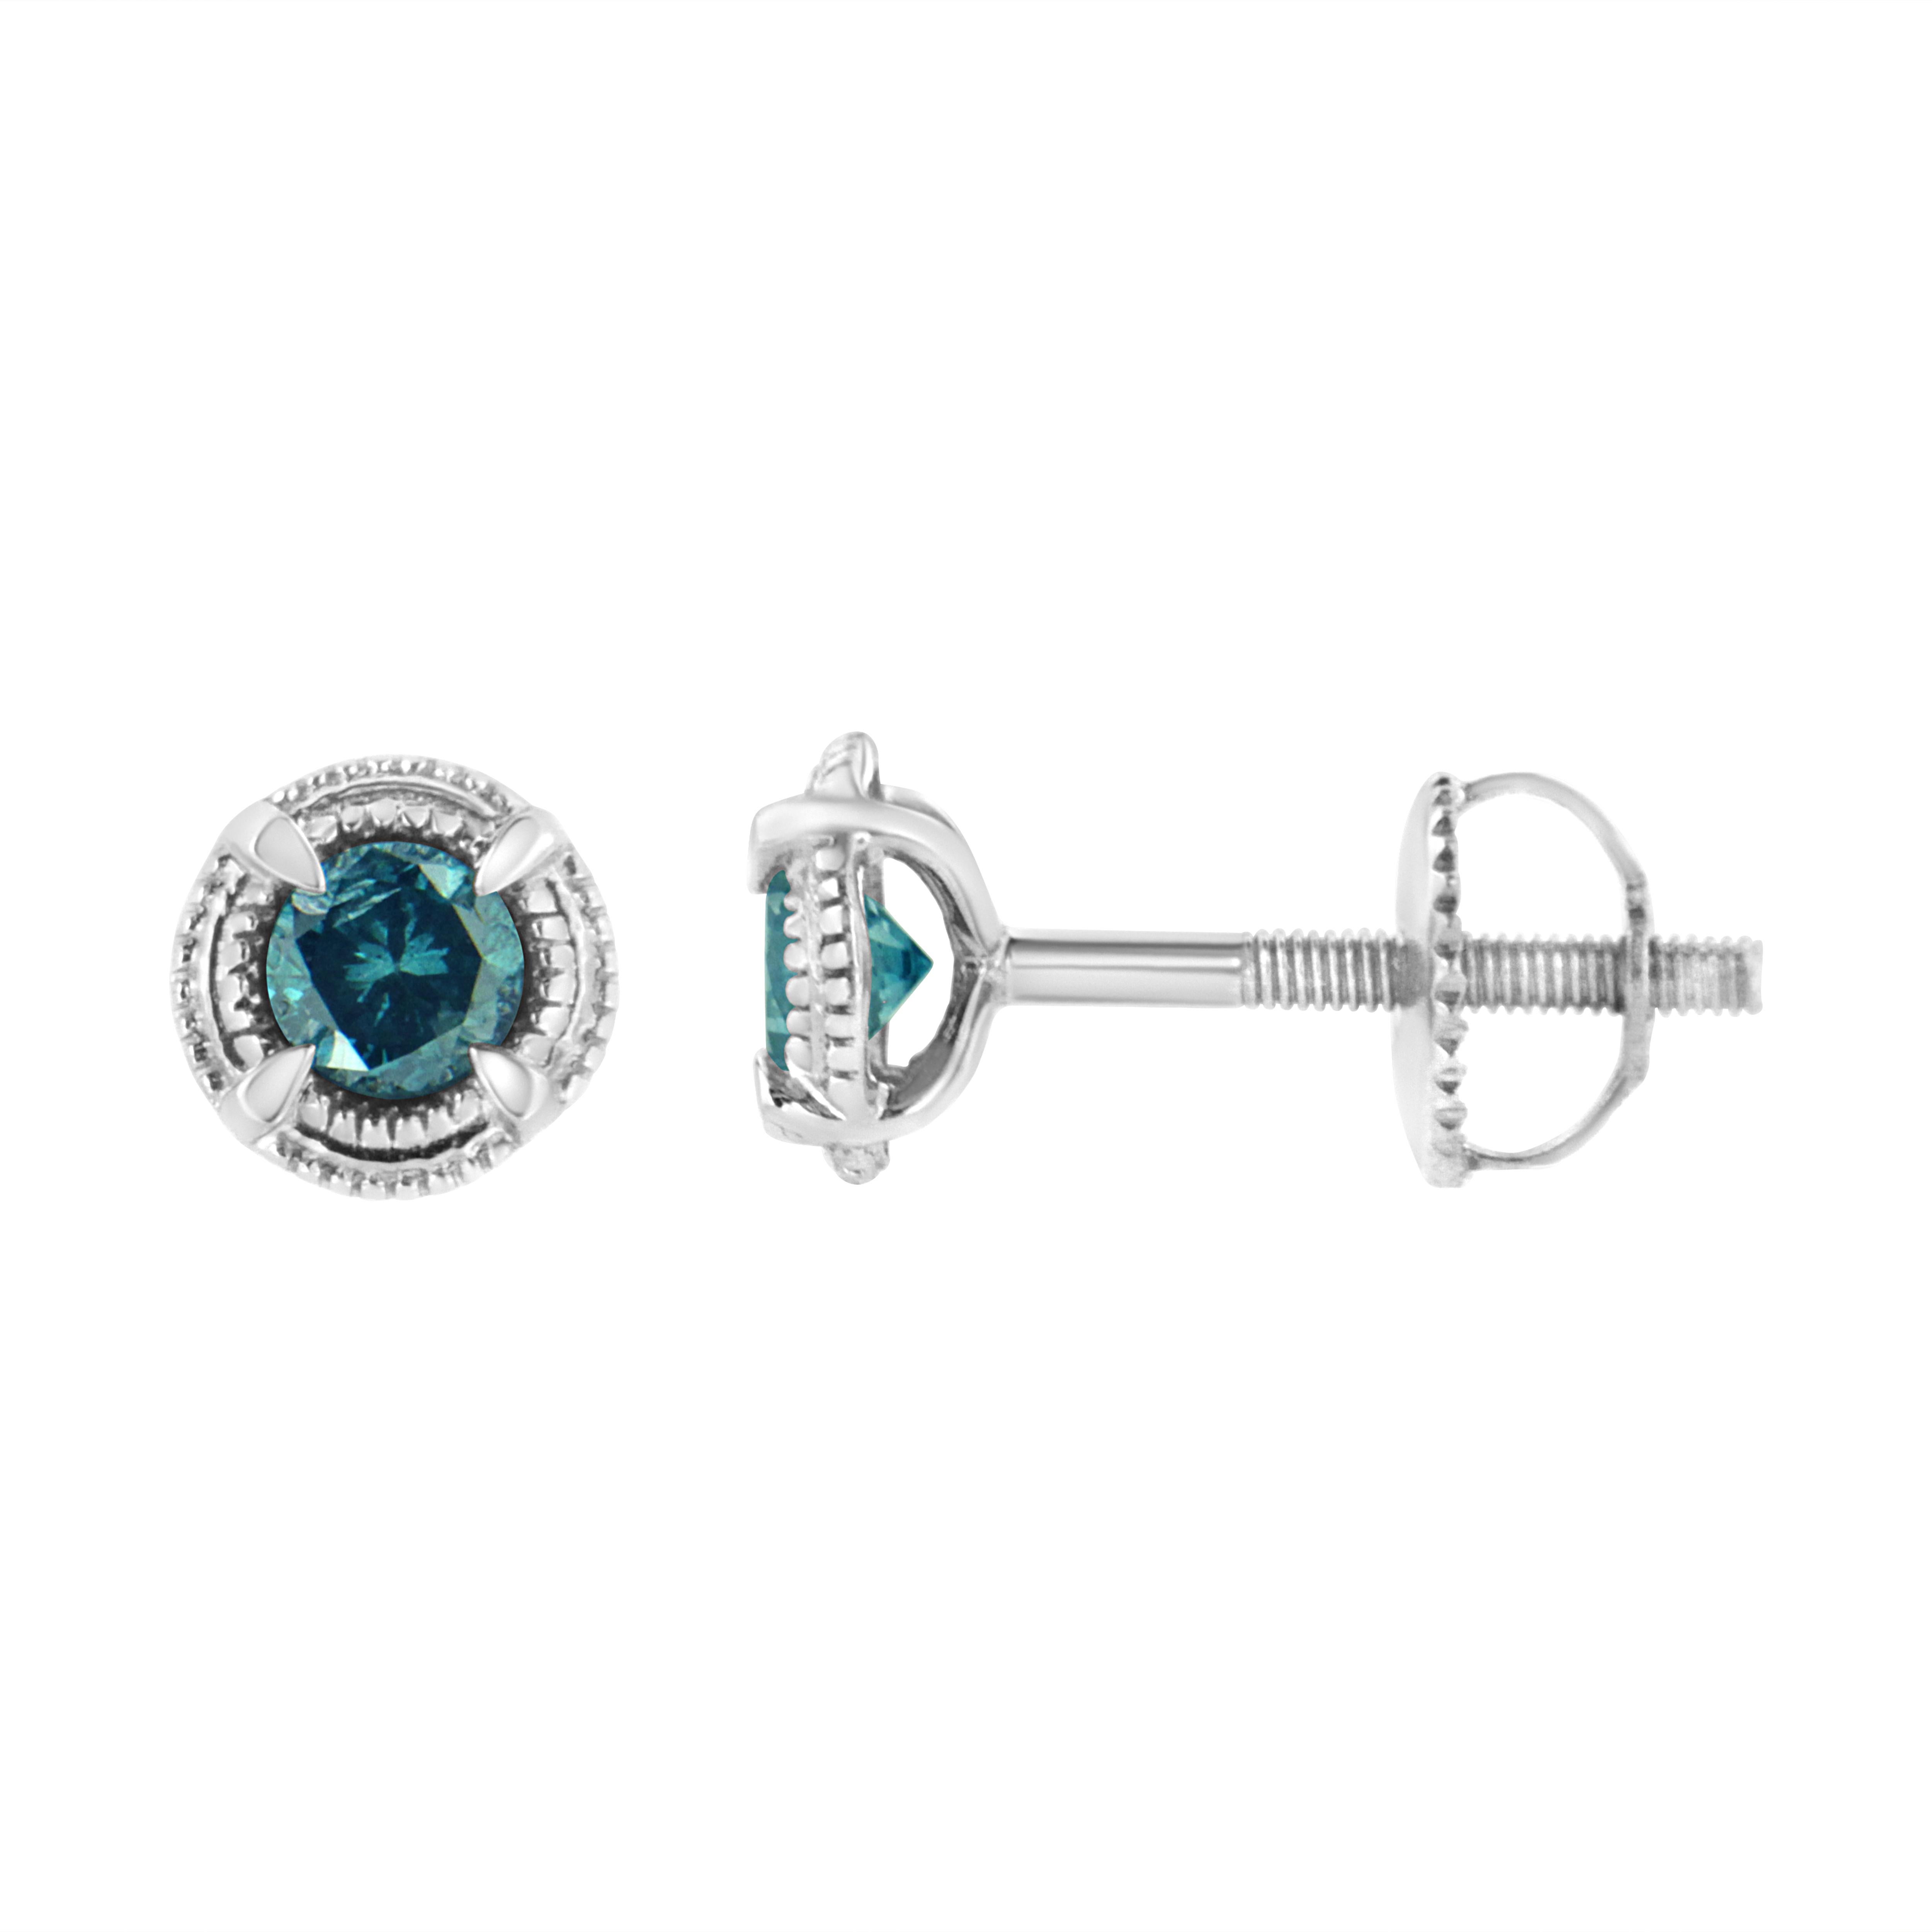 Add this stunningly unique diamond stud earrings to your jewelry collection and impress all your girlfriends. This beautiful pair of studs are made from the finest .925 sterling silver, and is embellished with treated, blue round-cut diamonds in a